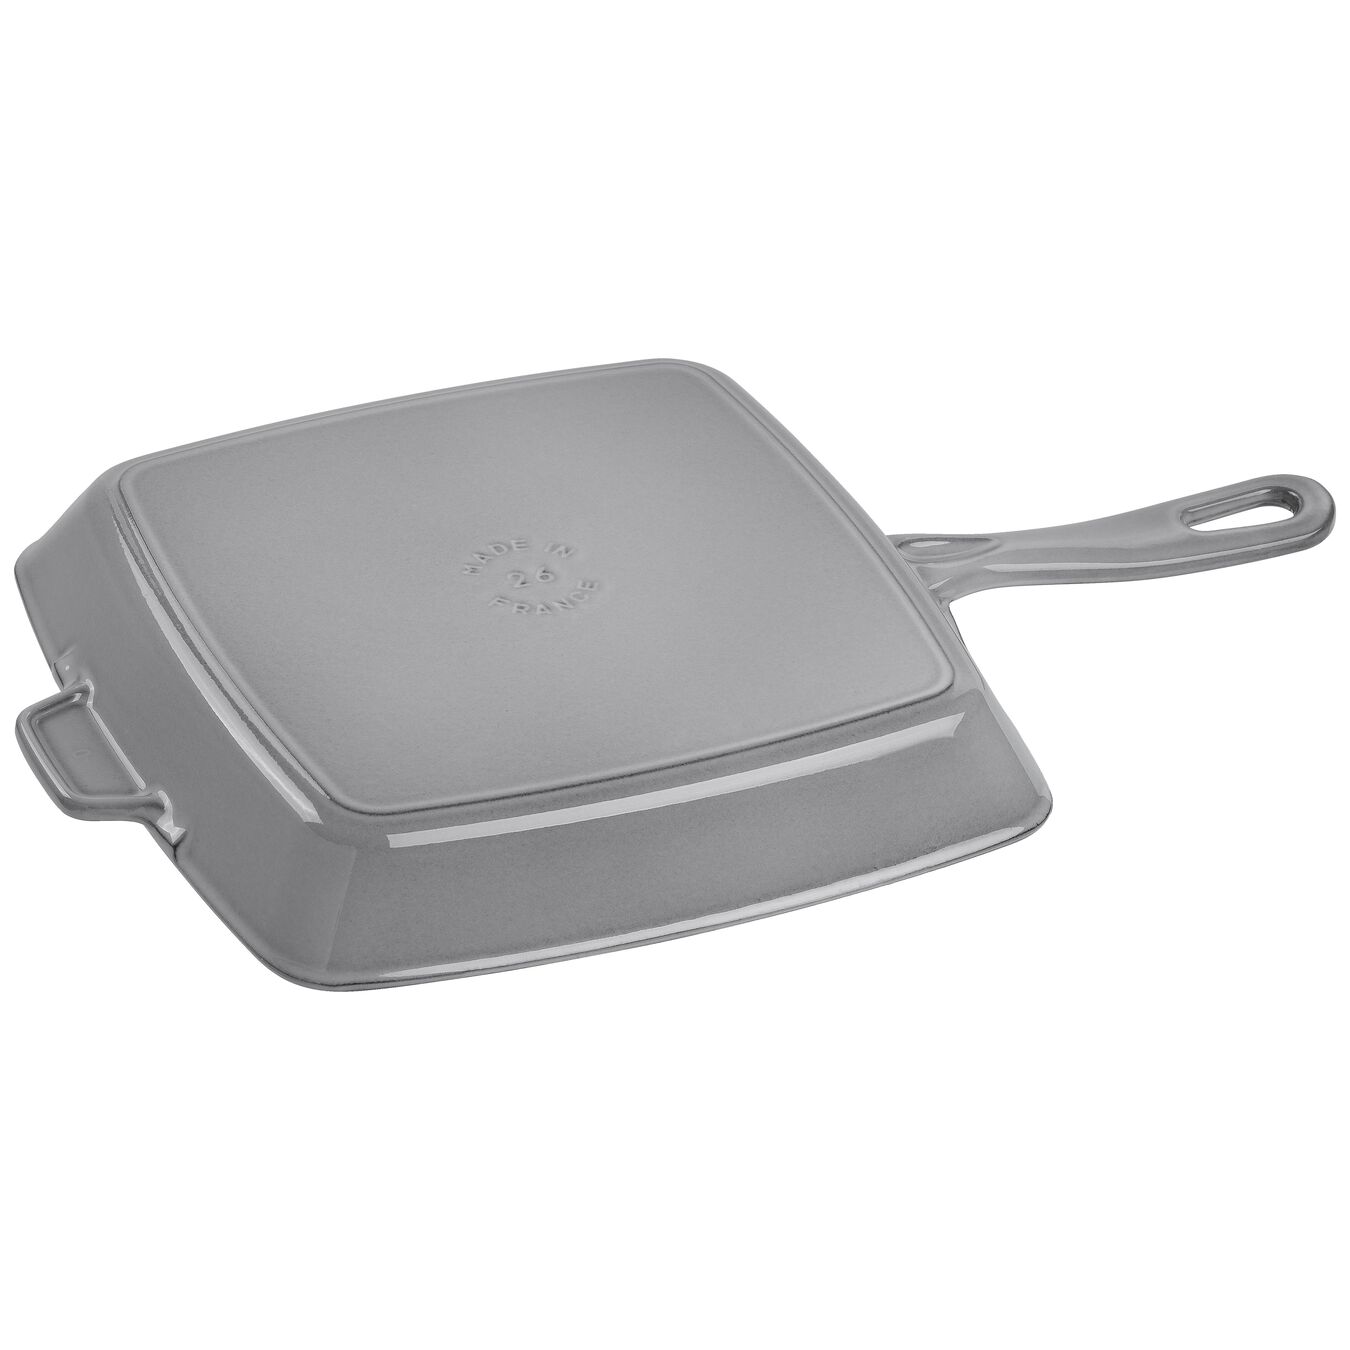 10-inch, cast iron, square, Grill Pan, graphite grey,,large 2